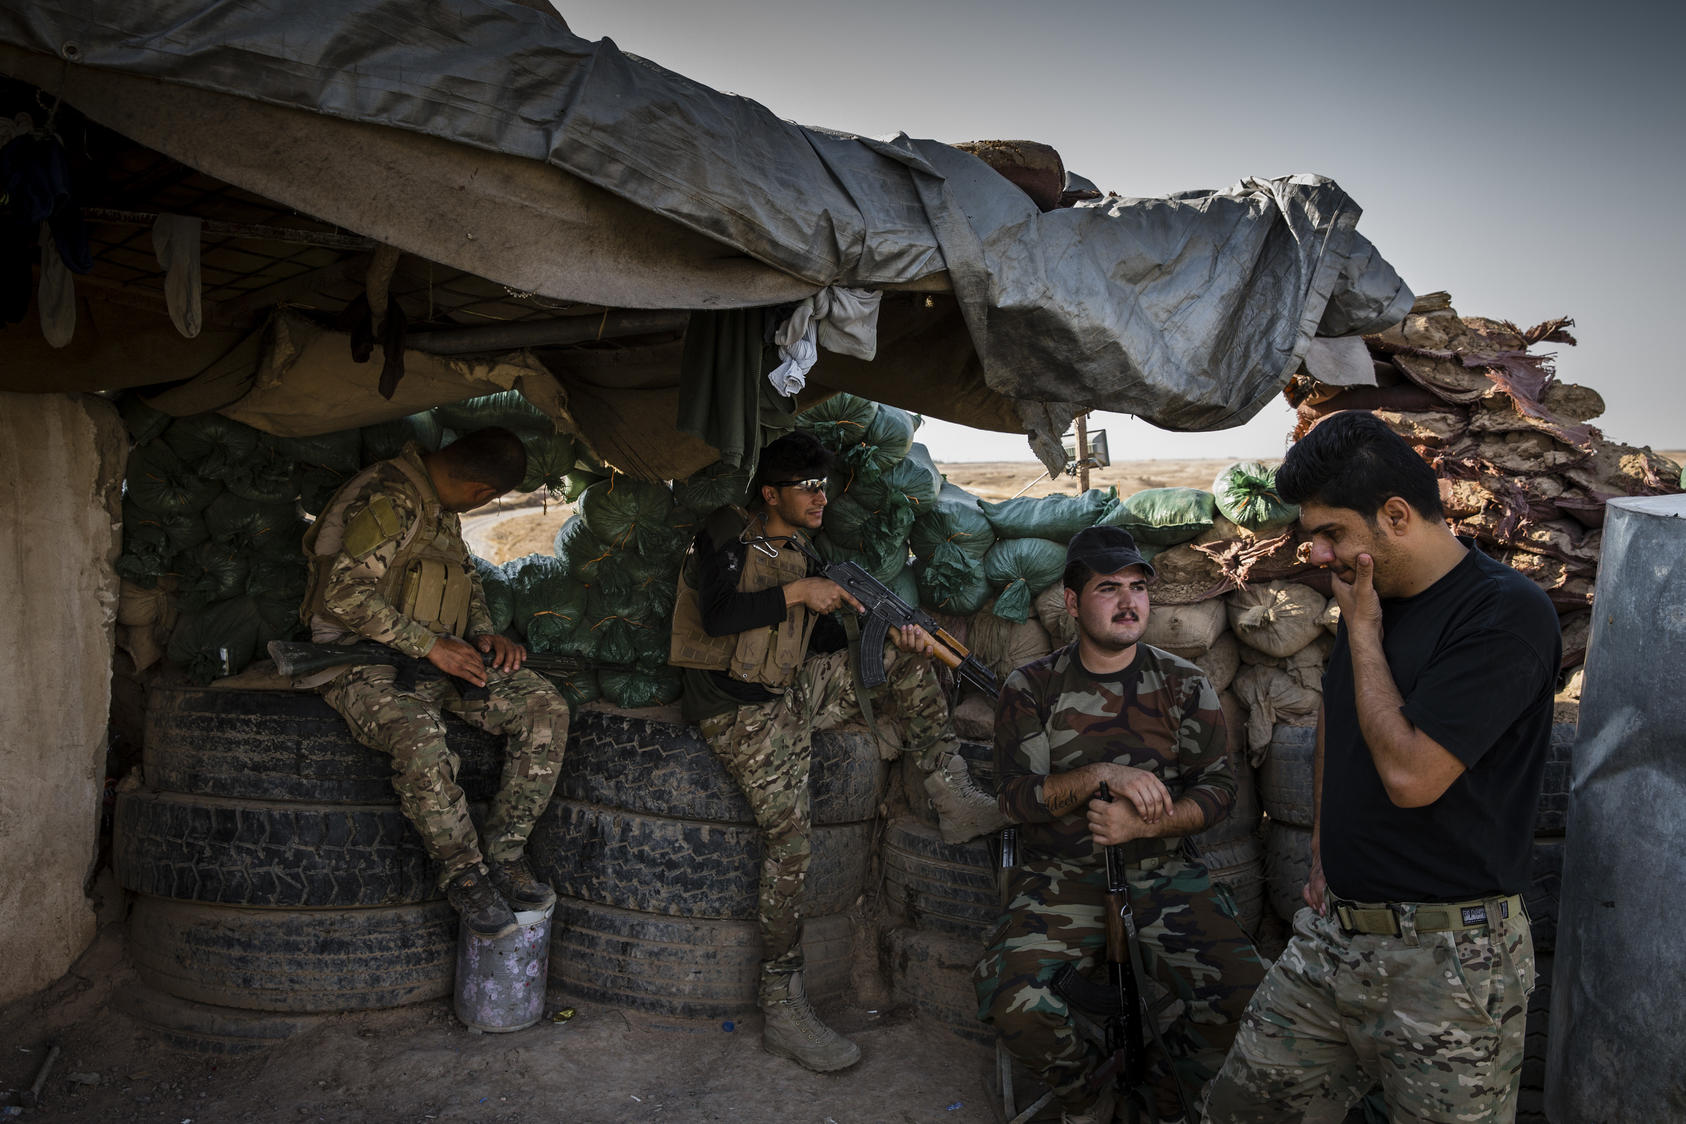 Kurdish peshmerga soldiers at a front-line position along the eastern edge of territory still held by Islamic State militants, near the city of Hawija, Iraq, Aug. 27, 2017.